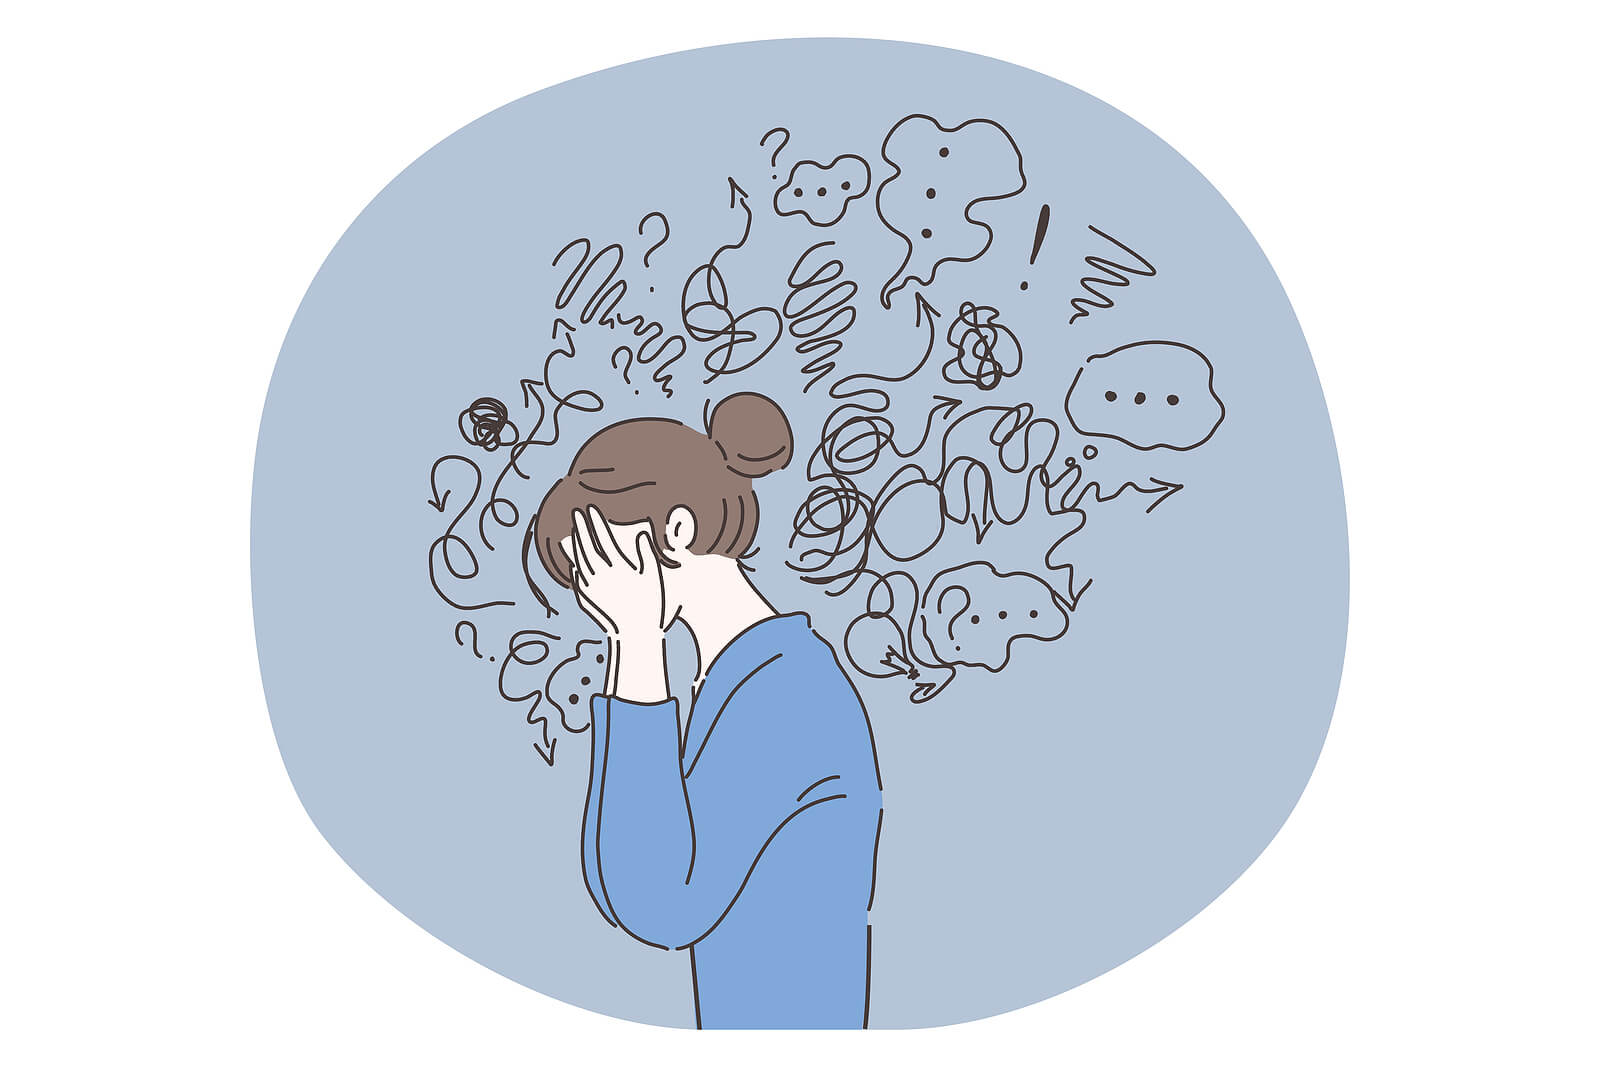 A graphic of a woman holding her head as cluttered thoughts flood their mind. Learn more about how EMDR therapy in Seattle, WA can offer support from the comfort of home in overcoming traumatic thoughts. Learn more about online EMDR therapy in Seattle, WA by contacting an EMDR therapist in Seattle, WA.